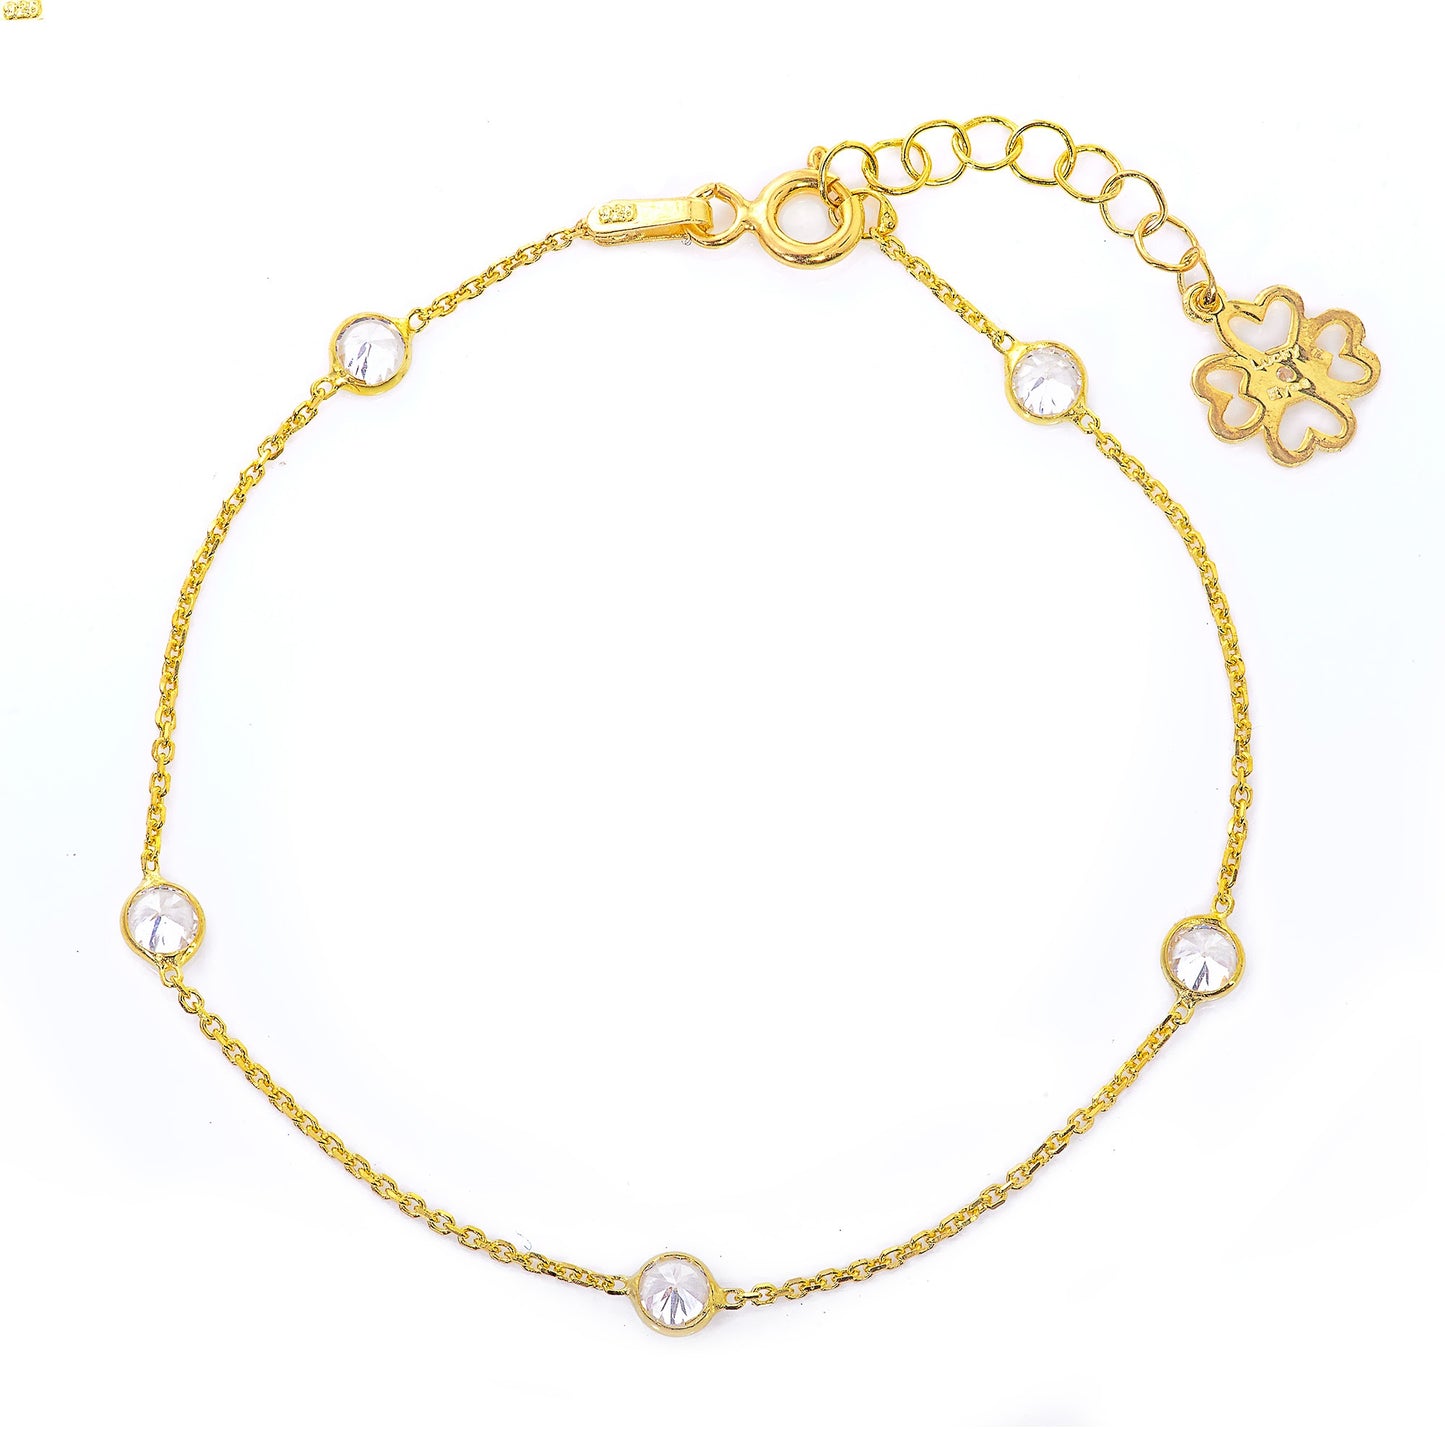 Mayfair Bracelet with 3.5mm Small Crystals on a Single Chain - Exclusive to Fenwick of Bond Street